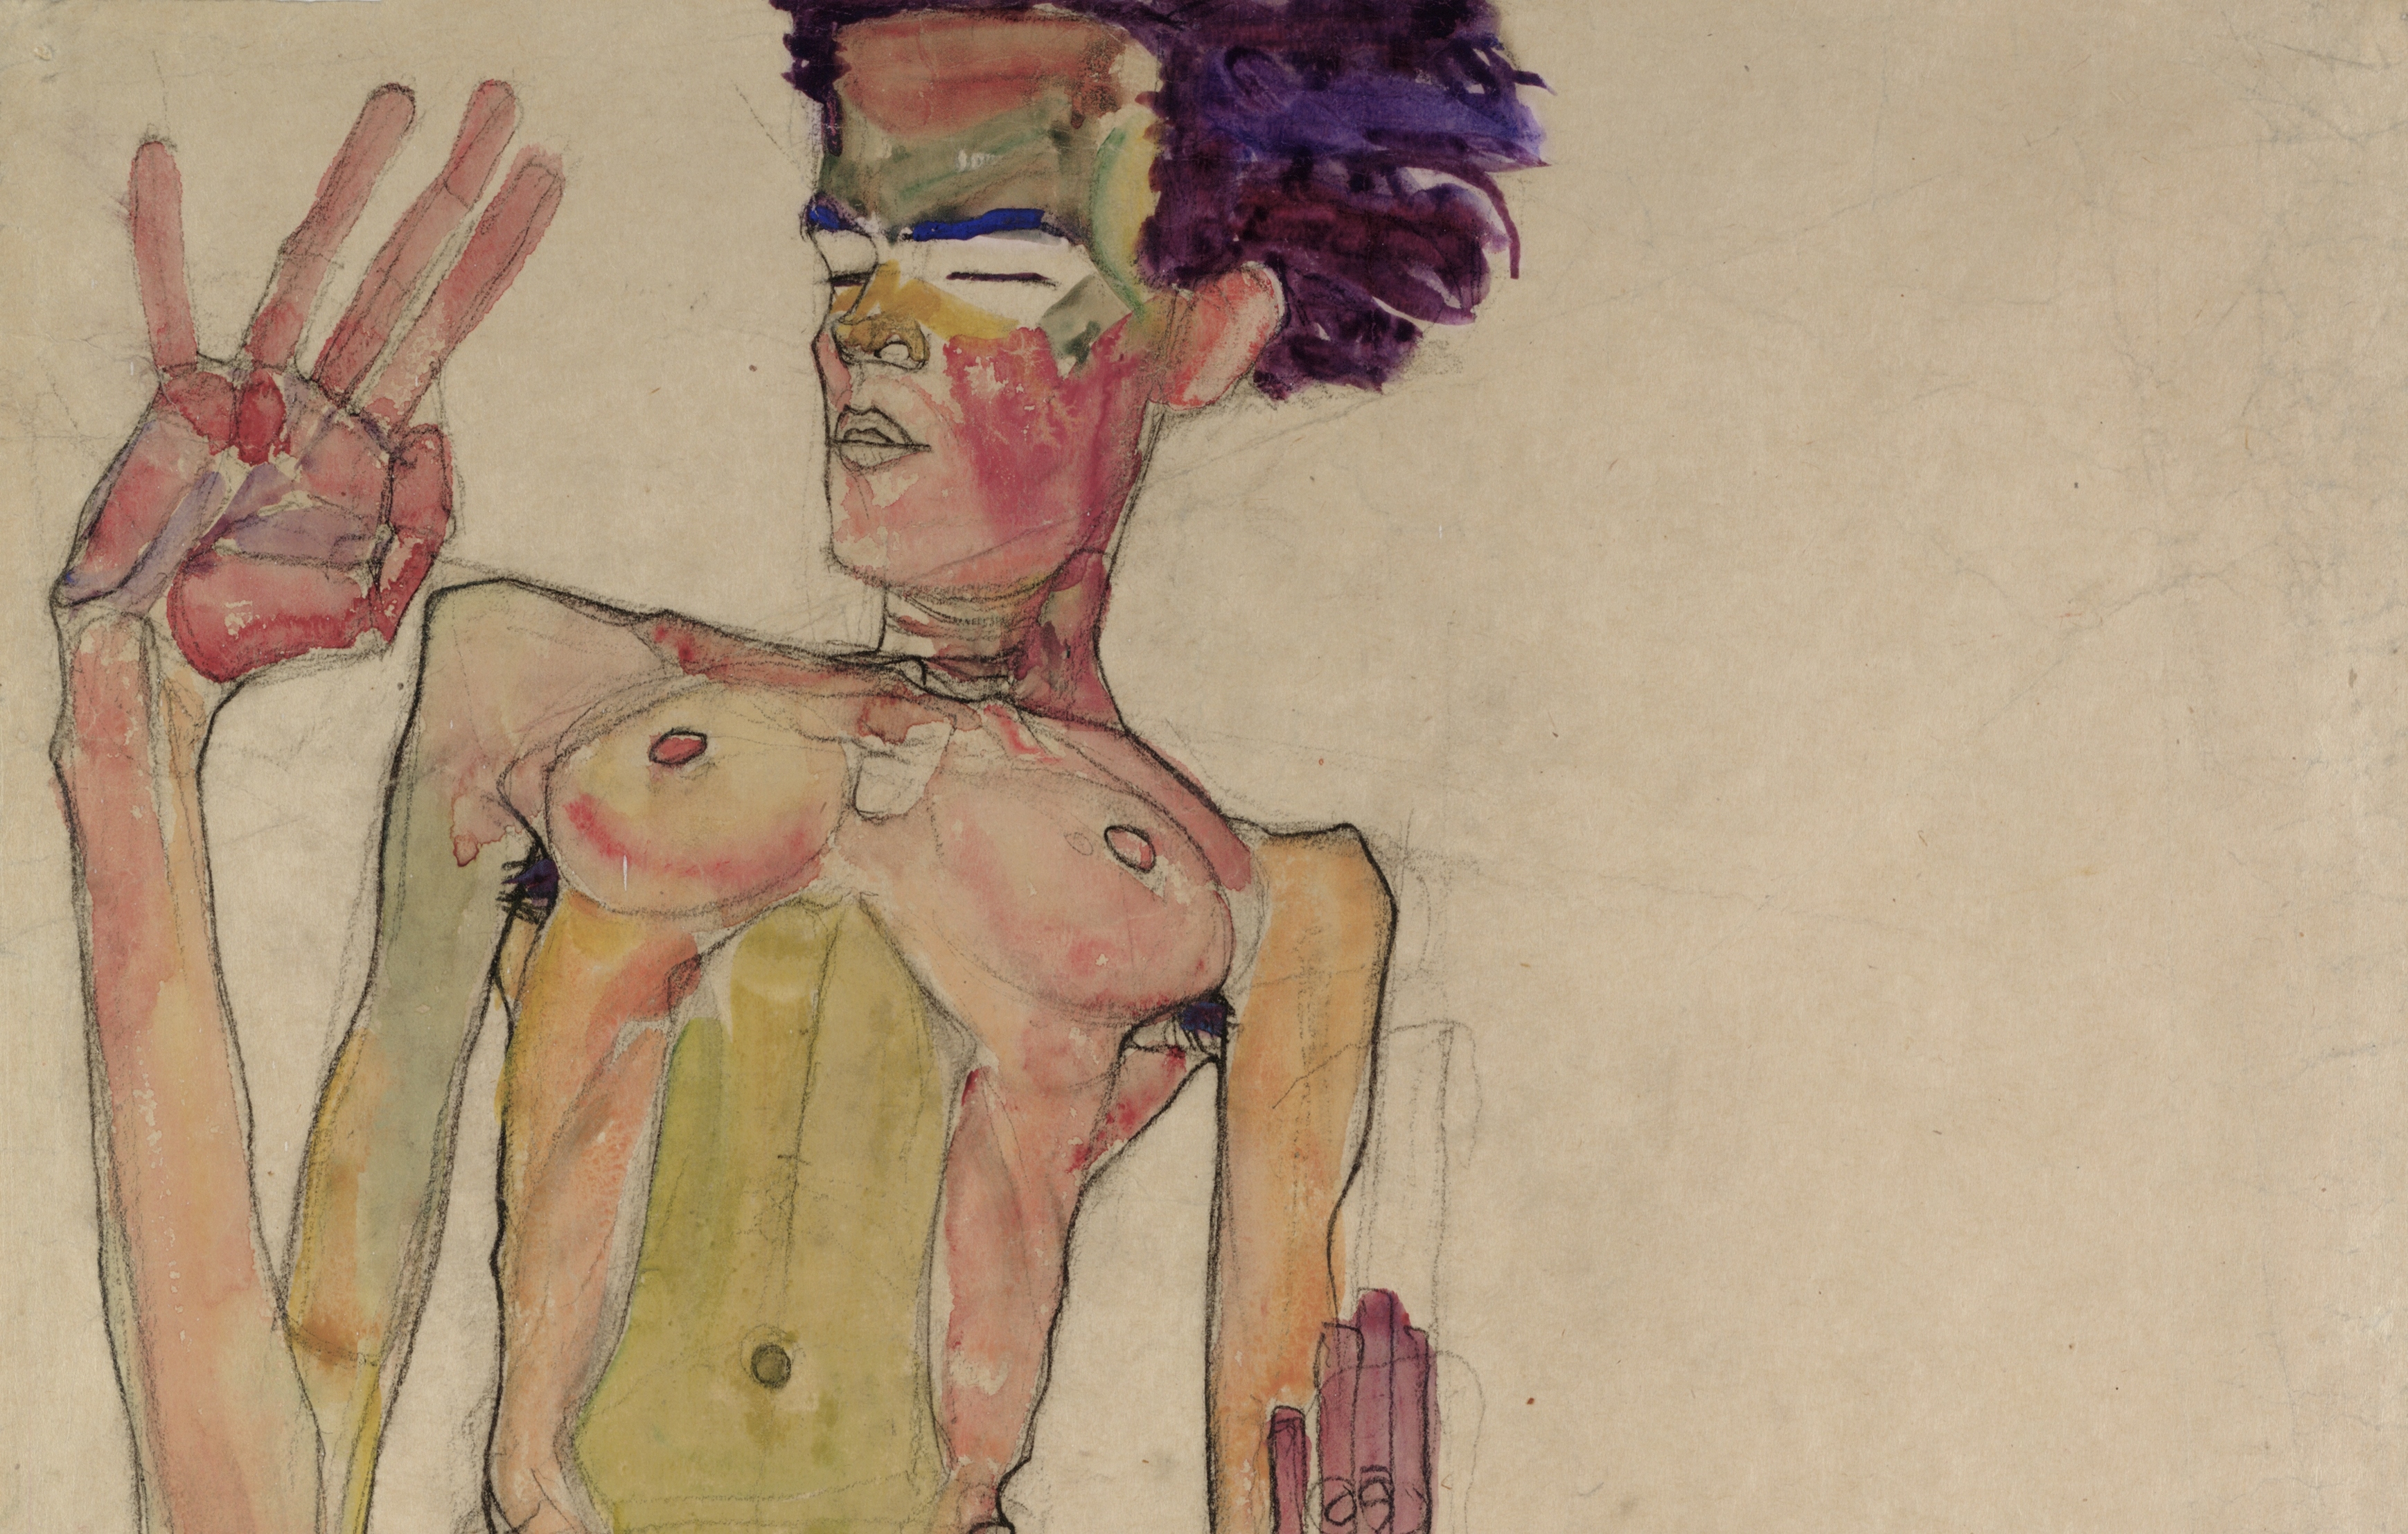 Egon Schiele (1890-1918) Kneeling Nude with Raised Hands  (Self-Portrait), 1910 Black chalk and gouache on paper 63 x 45 cm The Leopold Museum, Vienna, courtesy of The Courtauld Gallery